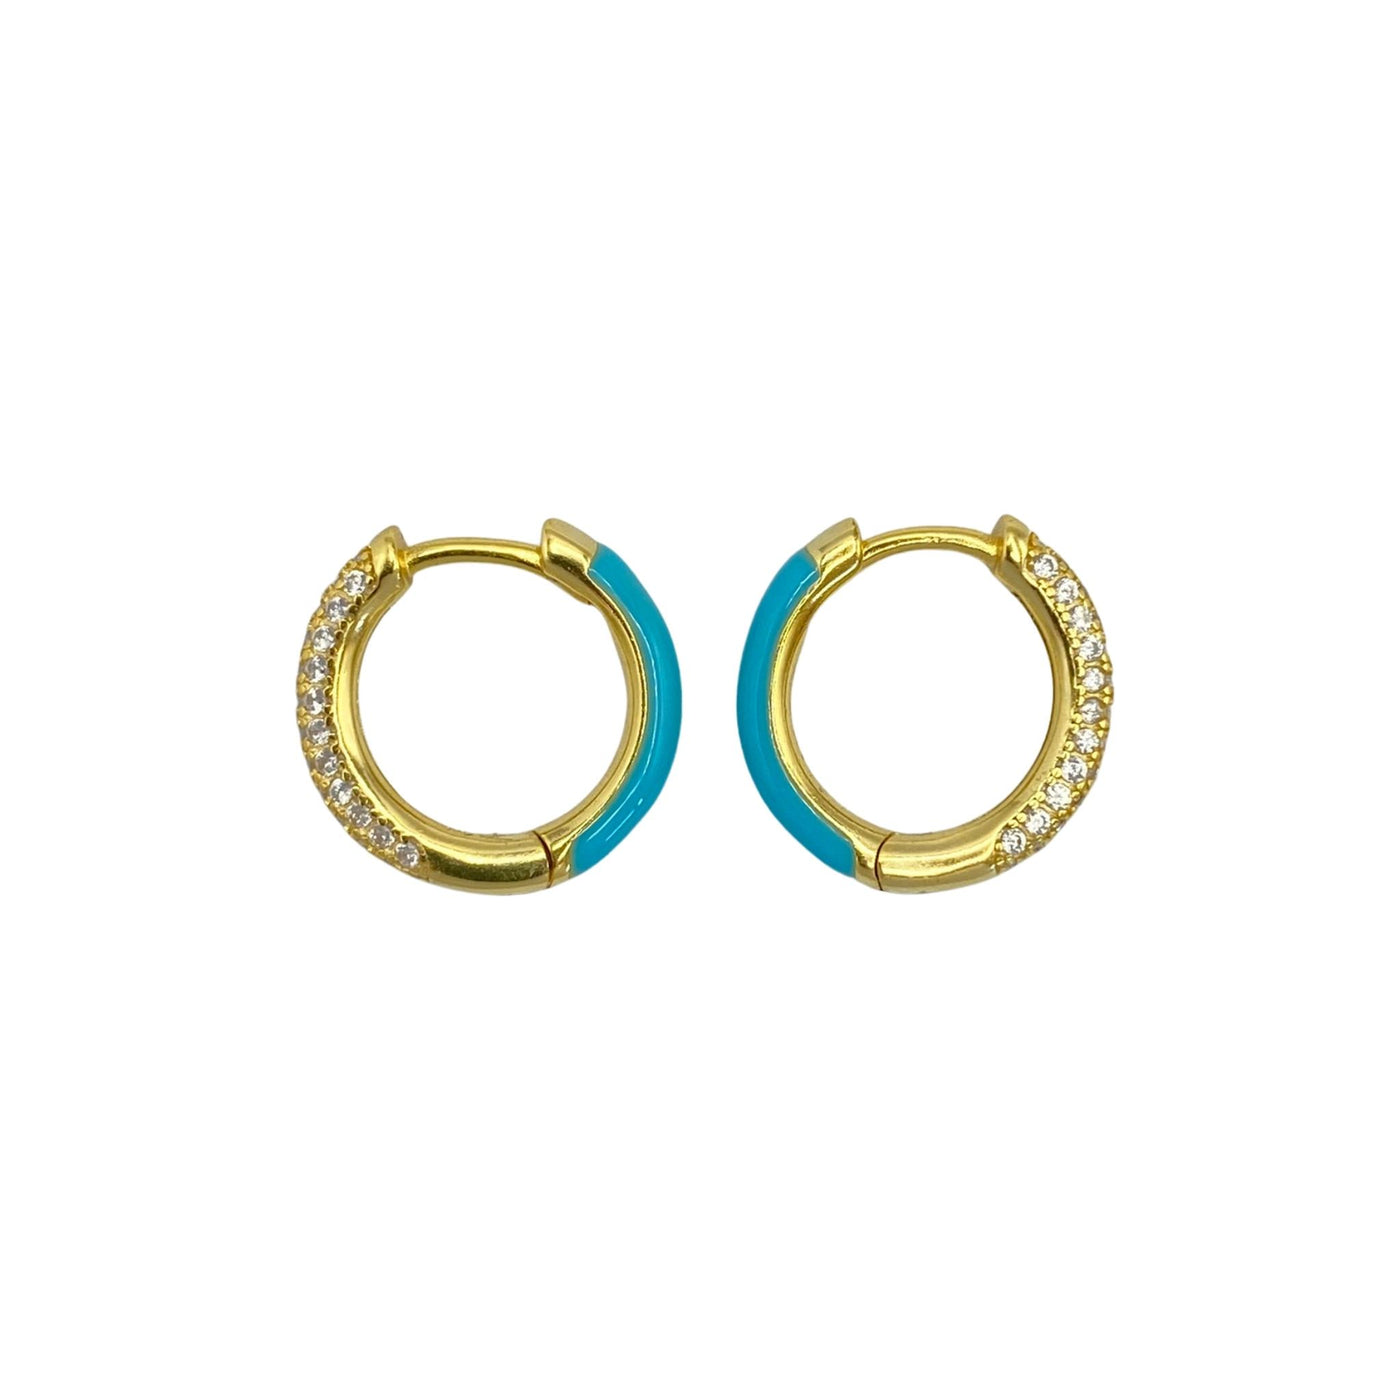 Silver earrings with enamel and zirconia - yellow 15 mm